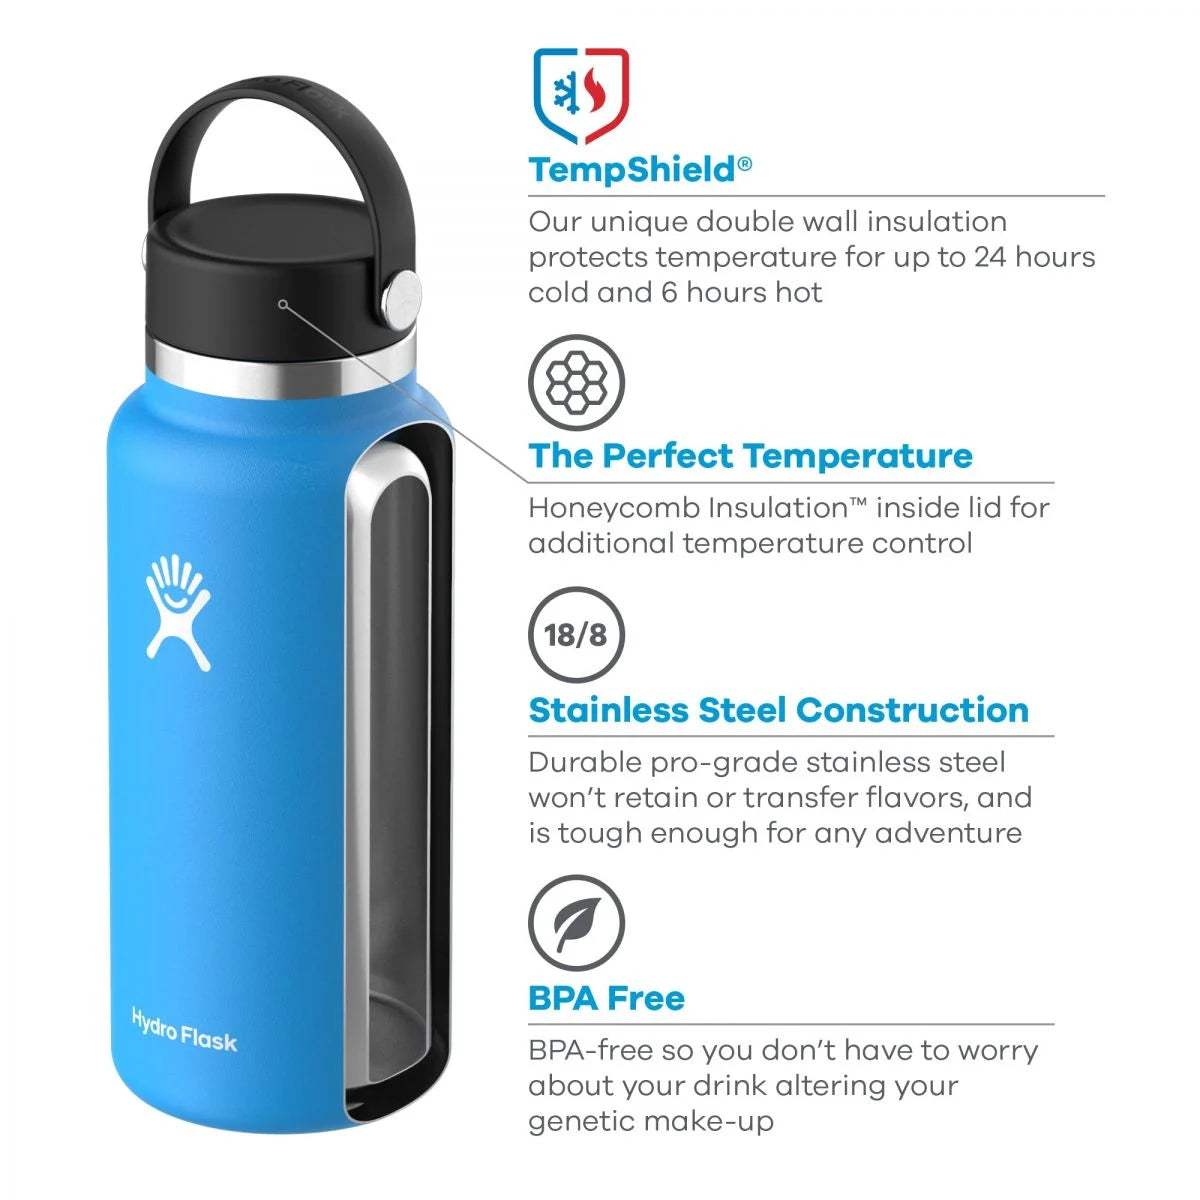 20 oz (591 ml) Wide Mouth Hydro Flask - The Luxury Promotional Gifts Company Limited